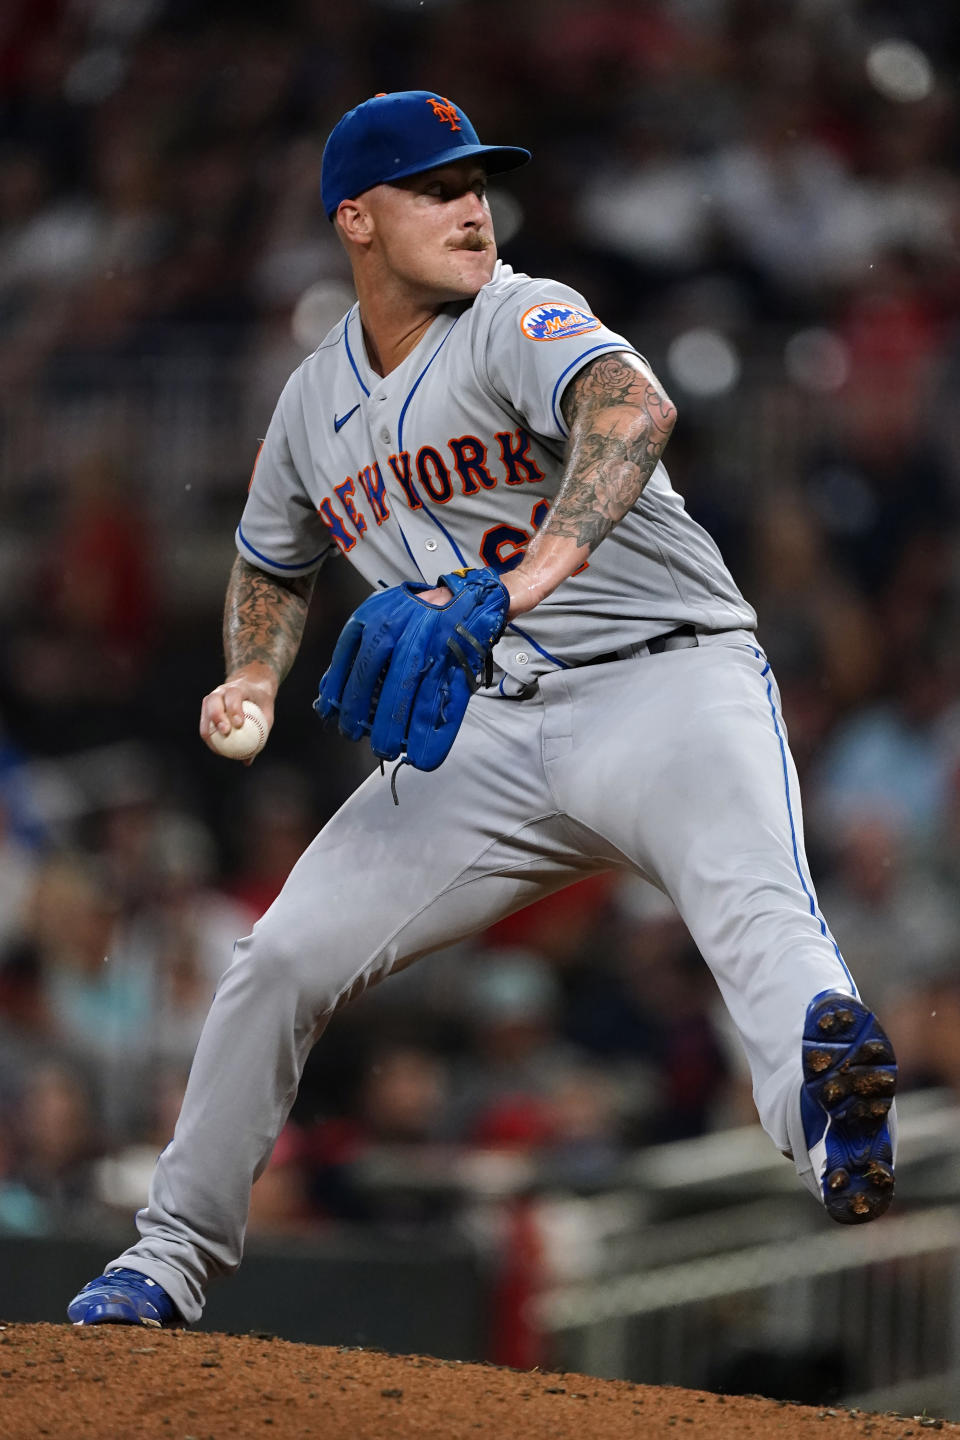 New York Mets relief pitcher Sean Reid-Foley works against the Atlanta Braves during the fourth inning of a baseball game Wednesday, June 30, 2021, in Atlanta. (AP Photo/John Bazemore)